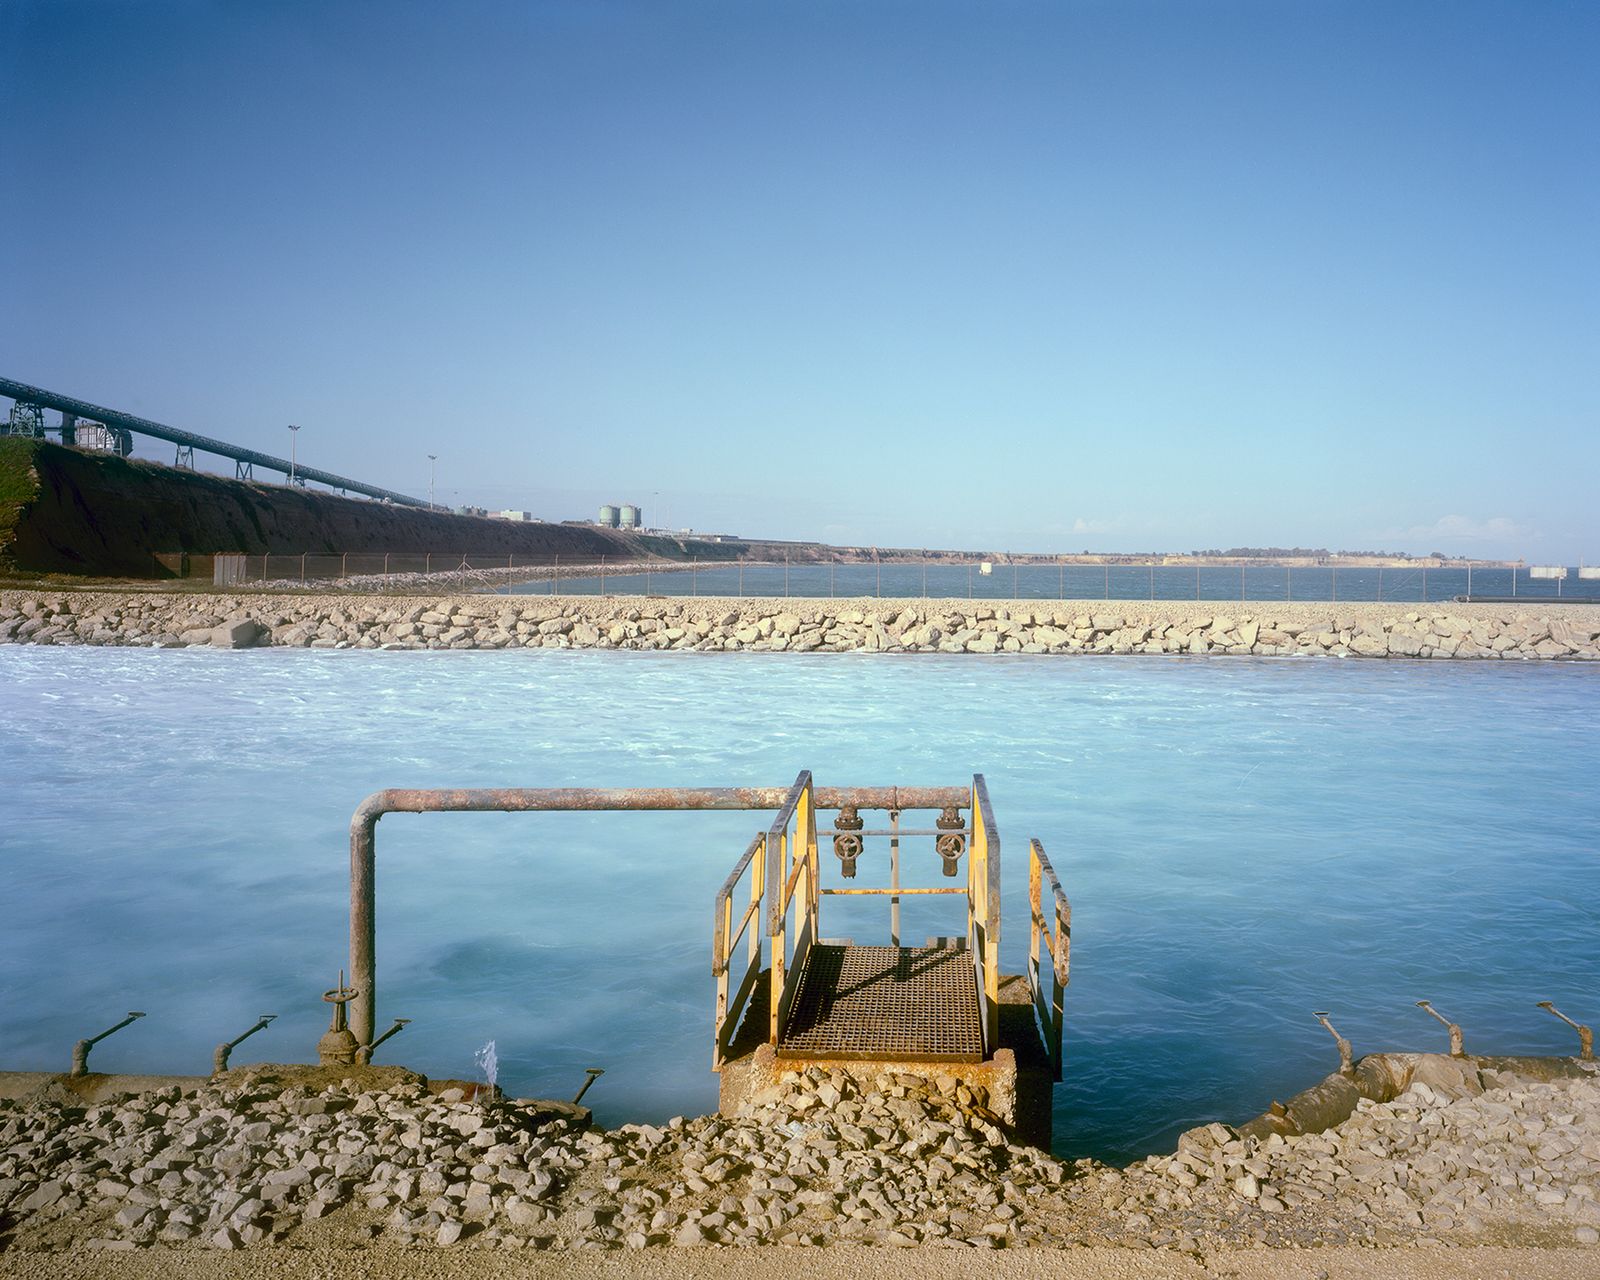 © Pietro Viti - The cooling water spilled from the power plant to the Adriatic sea. Cerano, Brindisi, 2015.